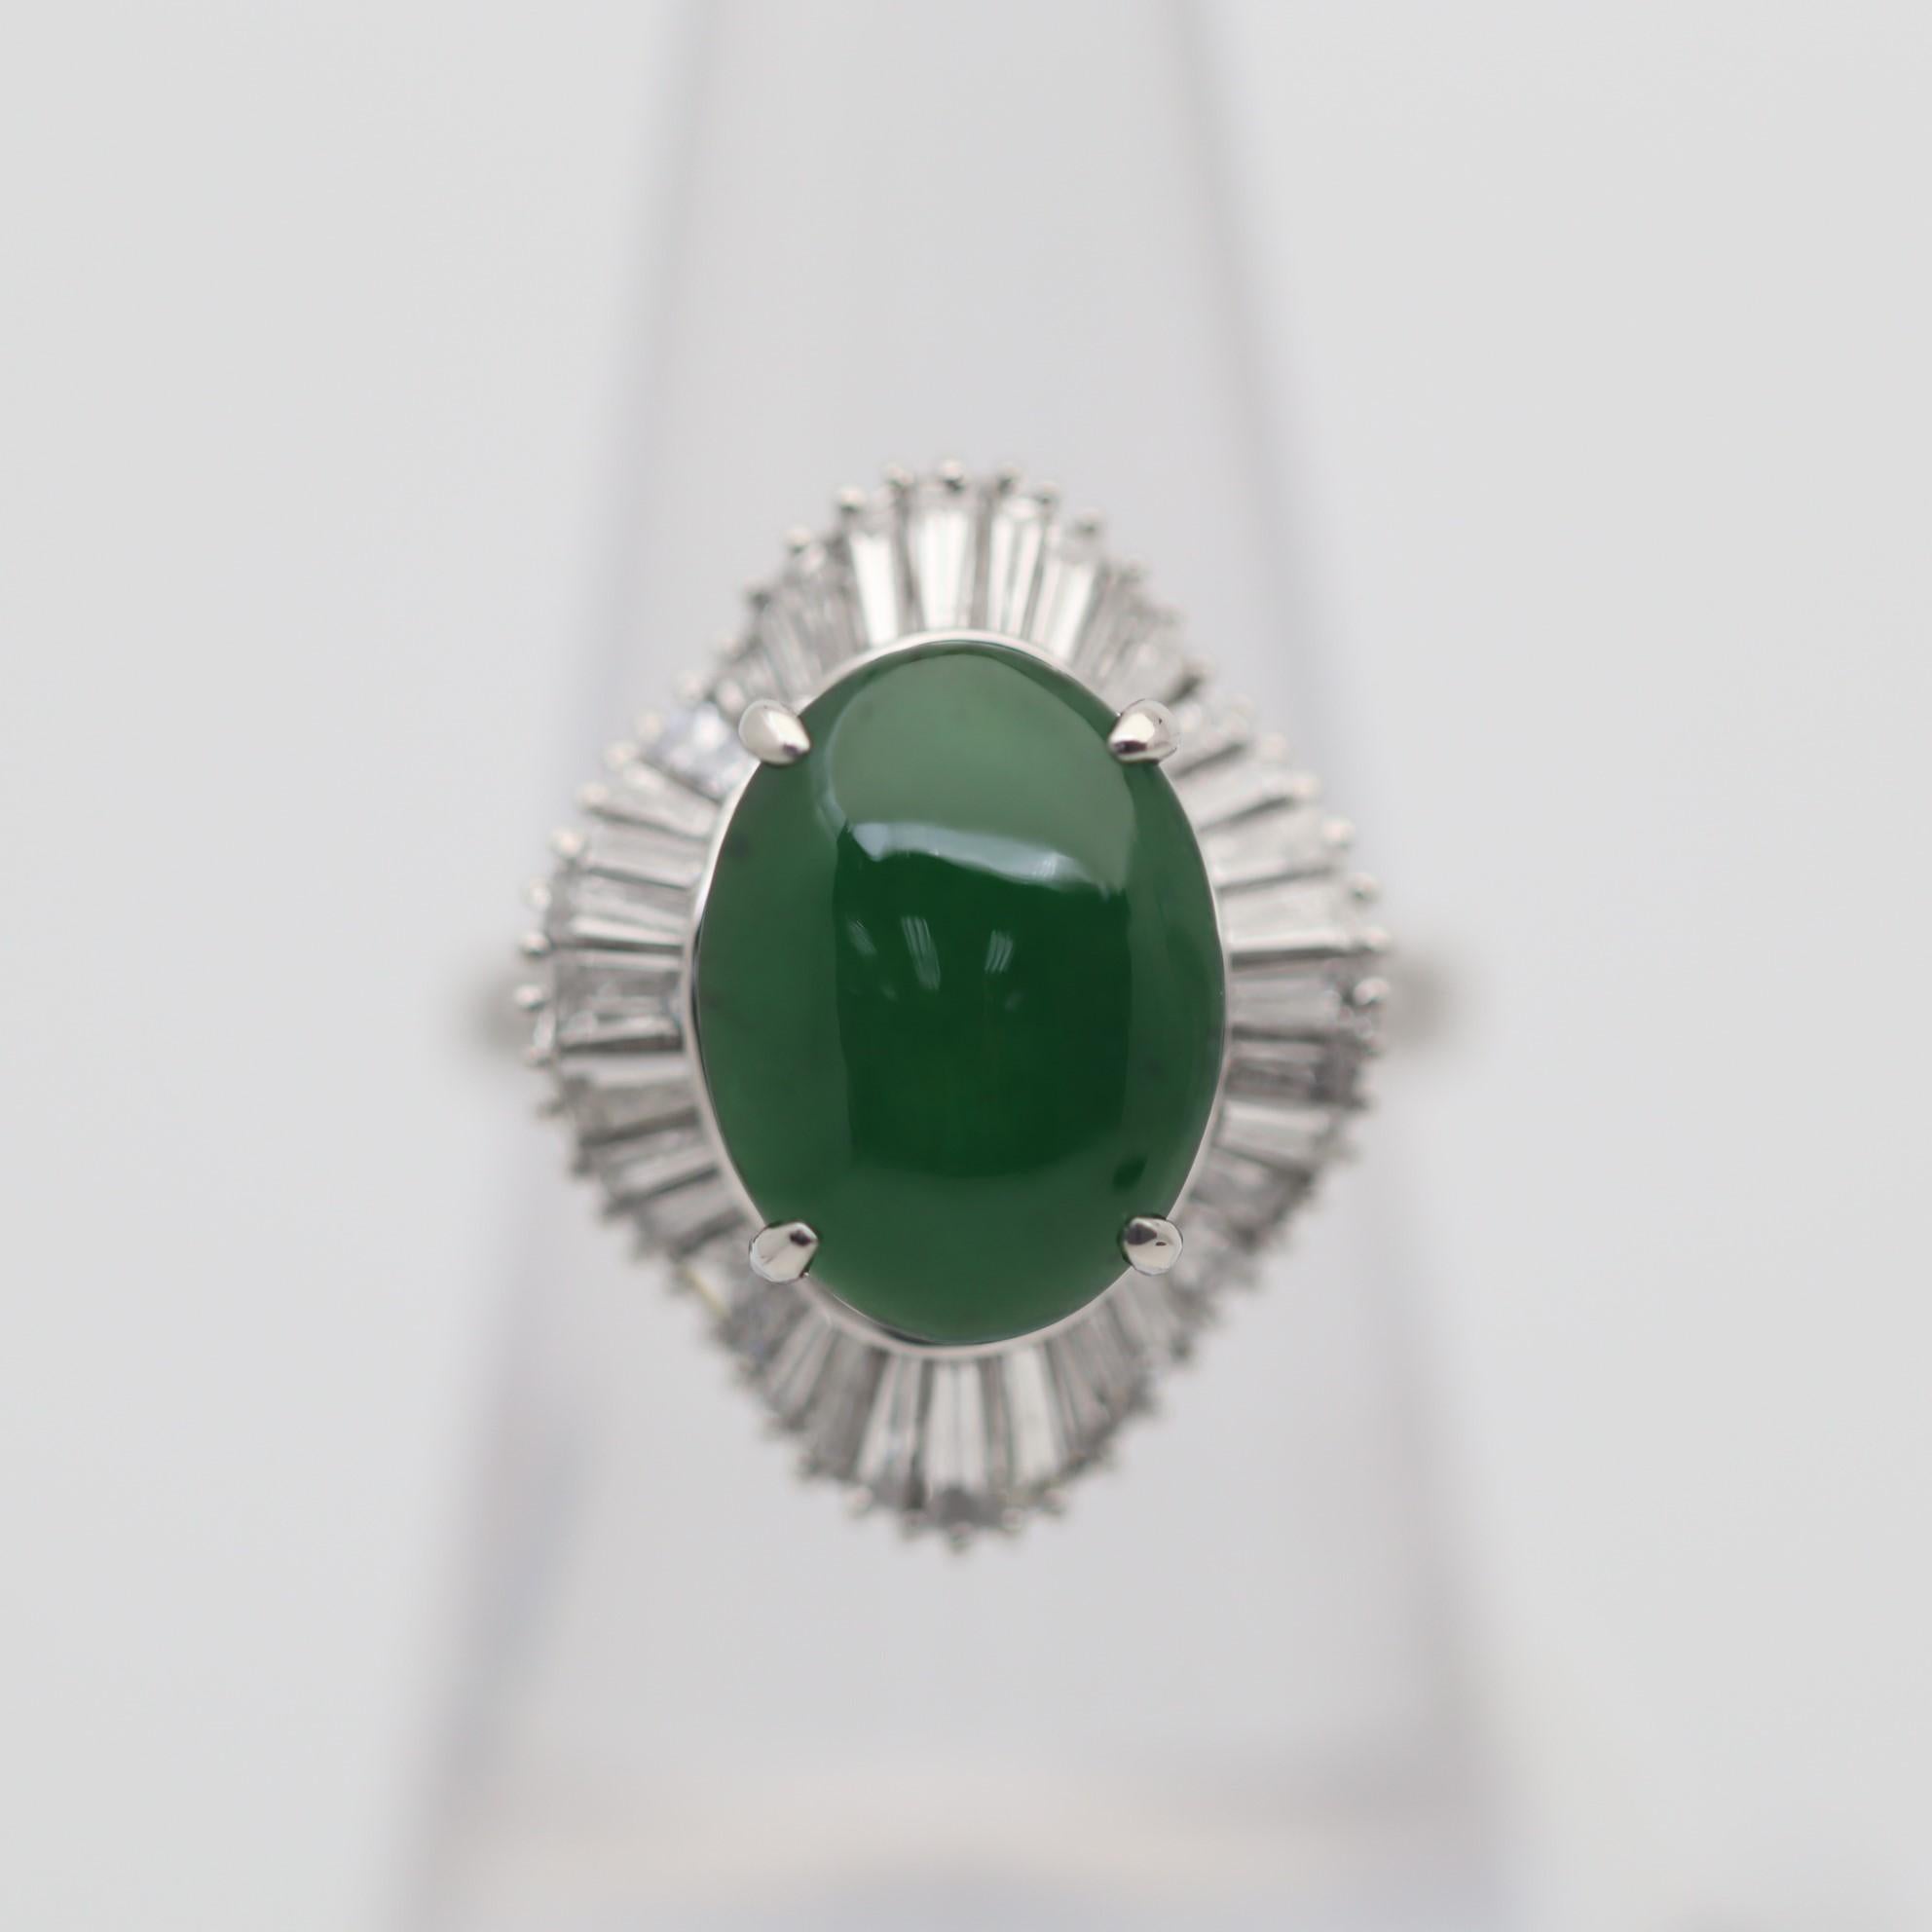 A finely made platinum ring featuring a fine piece of jadeite jade. The jade weighs 2.75 carats and has a rich deep grass green color. It is accented by 1.39 carats of baguette-cut diamonds which surround the jade in a ballerina style.